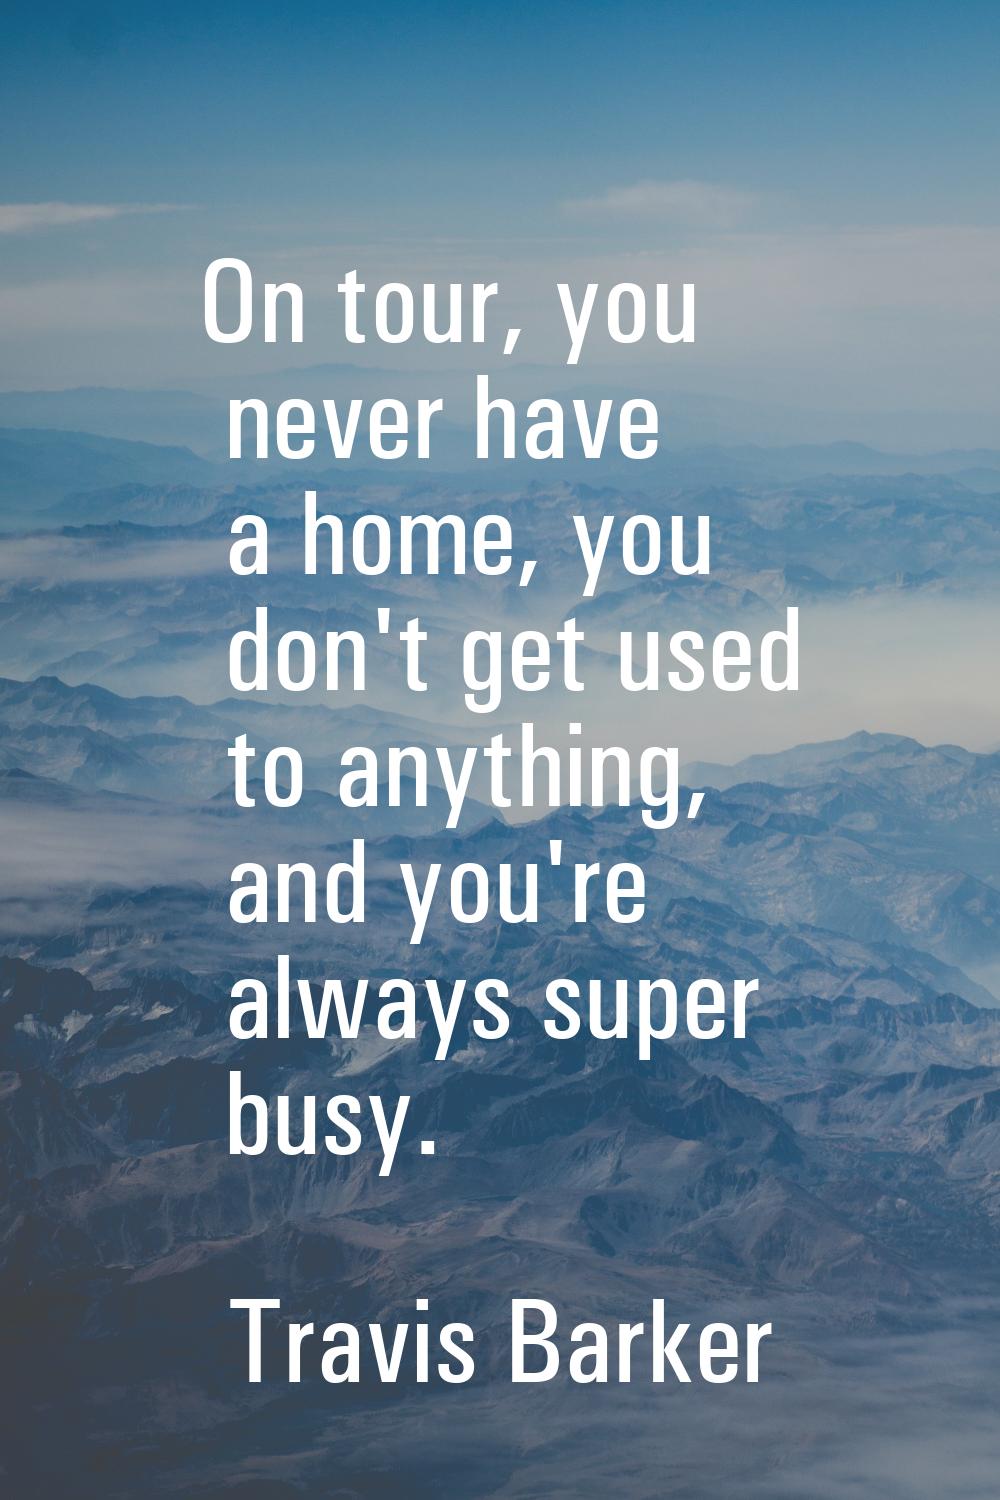 On tour, you never have a home, you don't get used to anything, and you're always super busy.